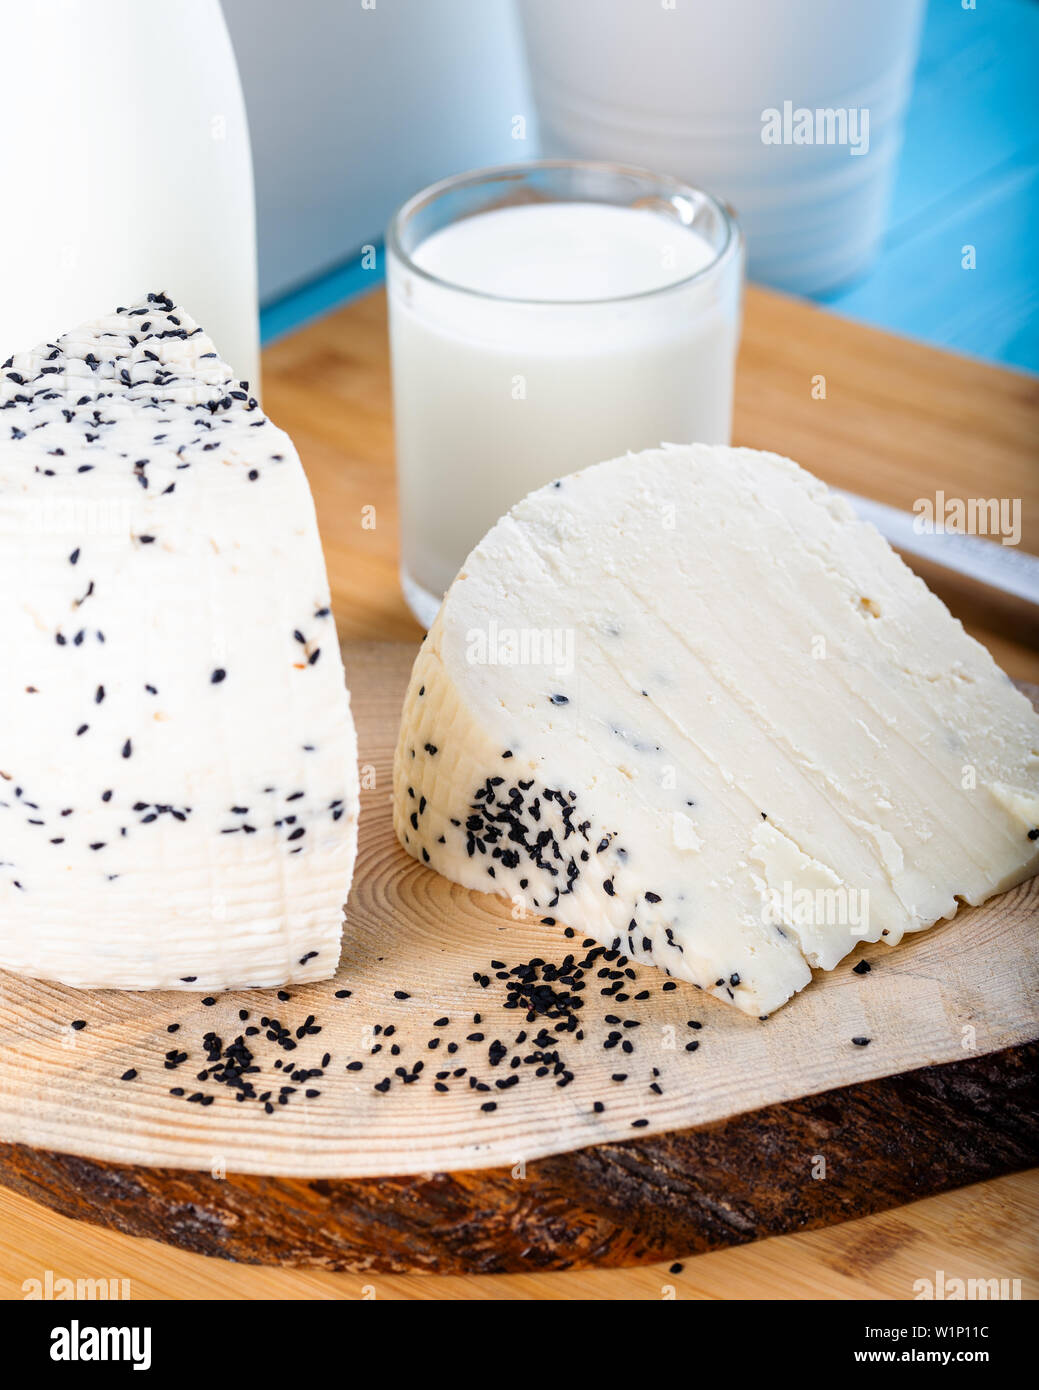 Cheese with black cumin seeds with bottle of milk on wooden background. Stock Photo